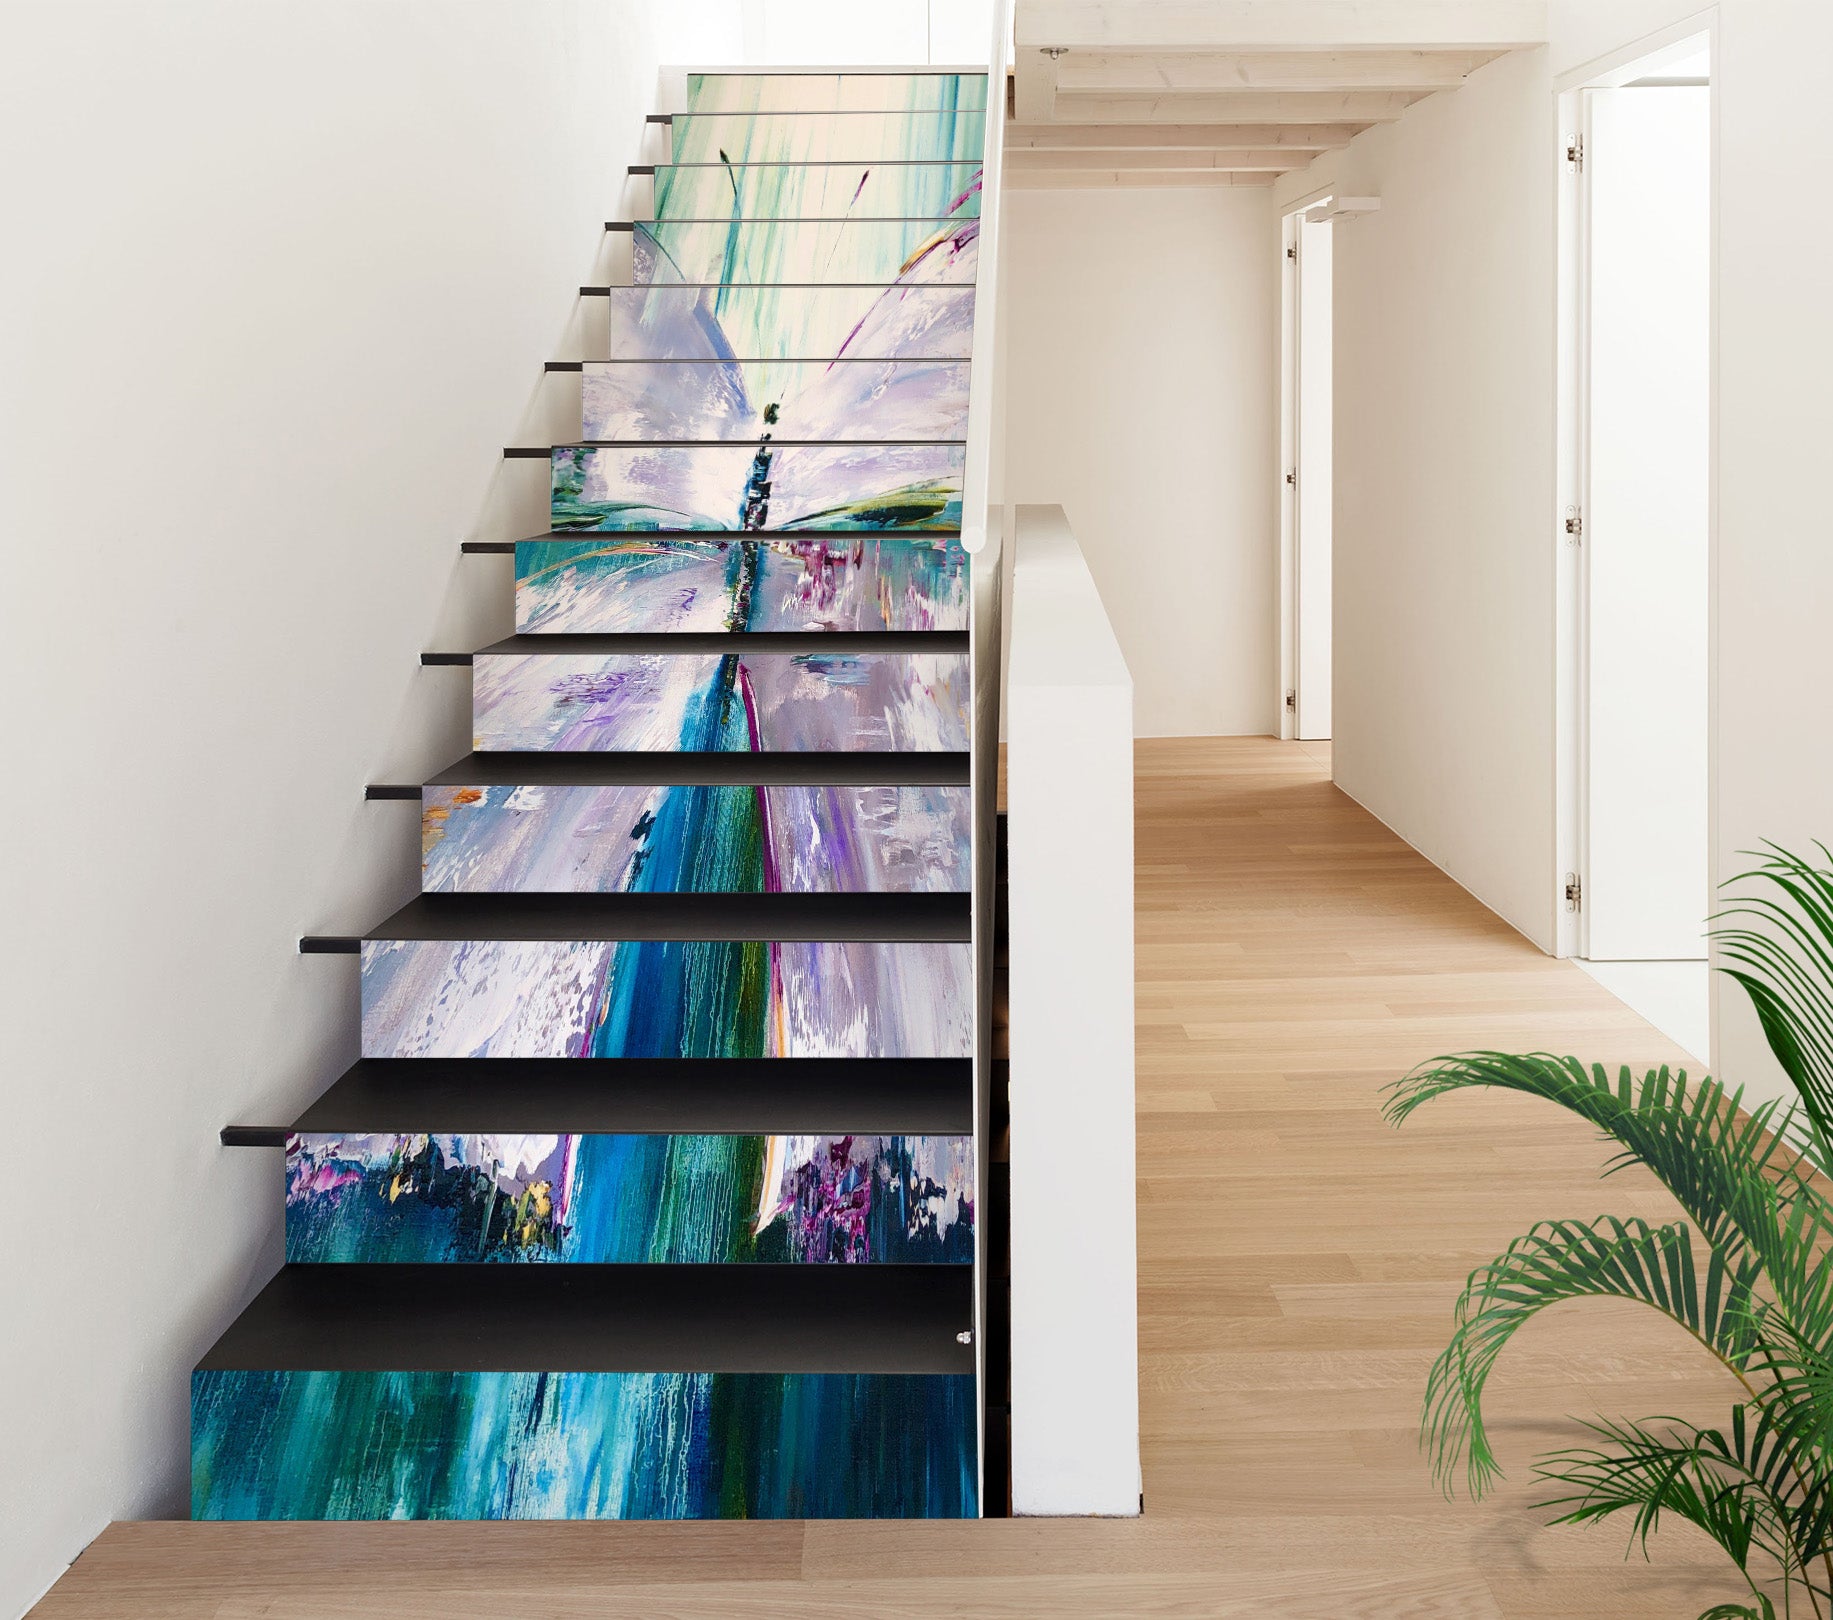 3D Painted Butterfly 2145 Skromova Marina Stair Risers